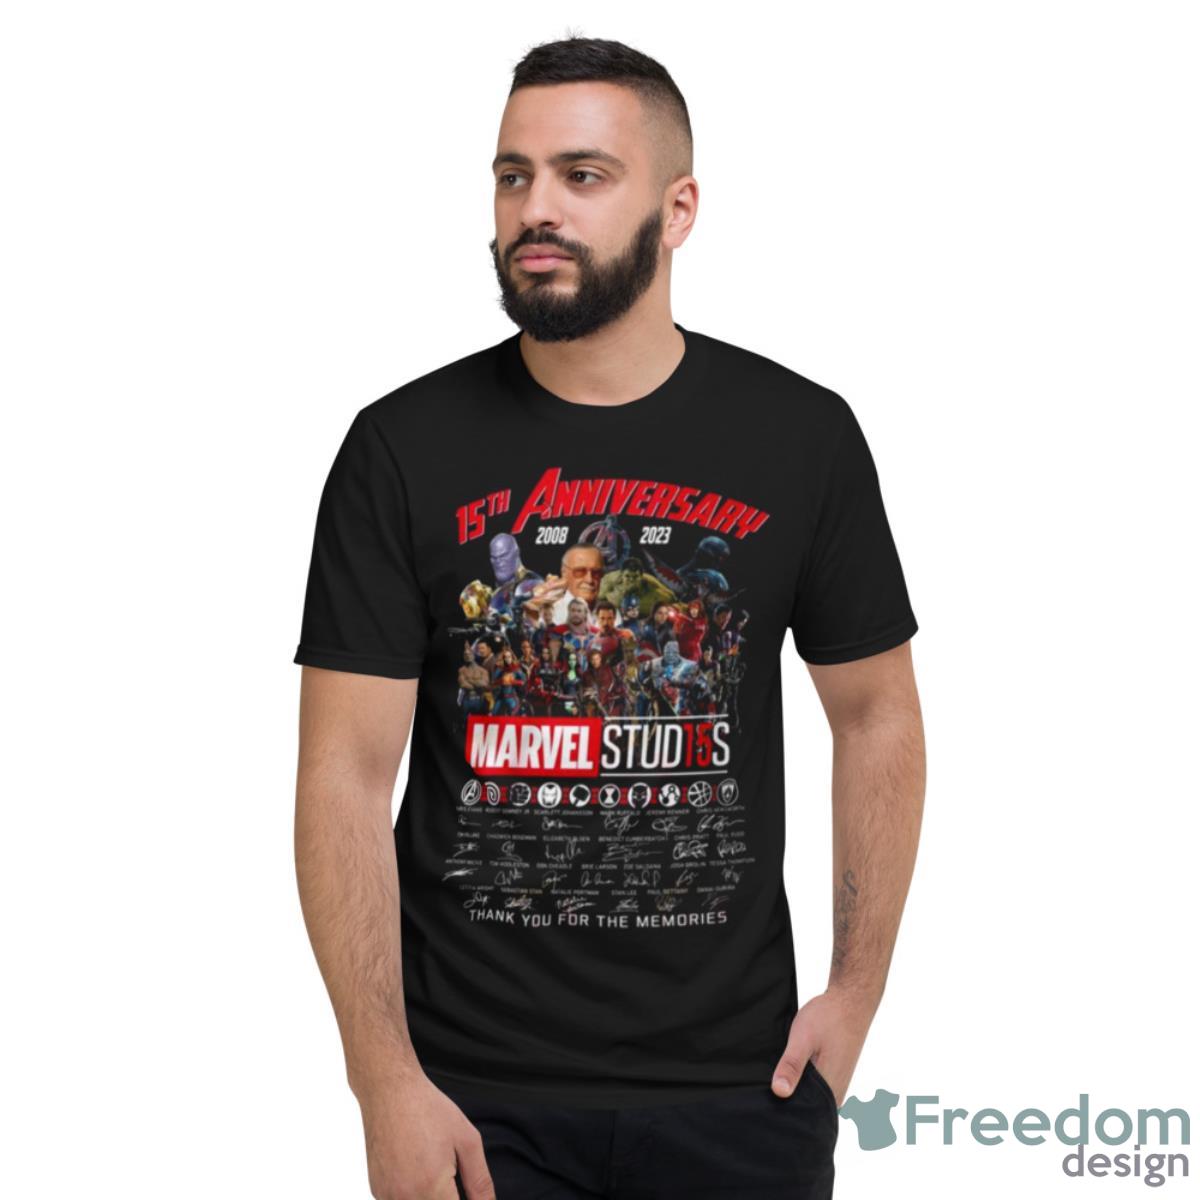 15th Anniversary 2008 – 2023 Marvel Stud15s Signature Thank You For The Memories T Shirt - Short Sleeve T-Shirt